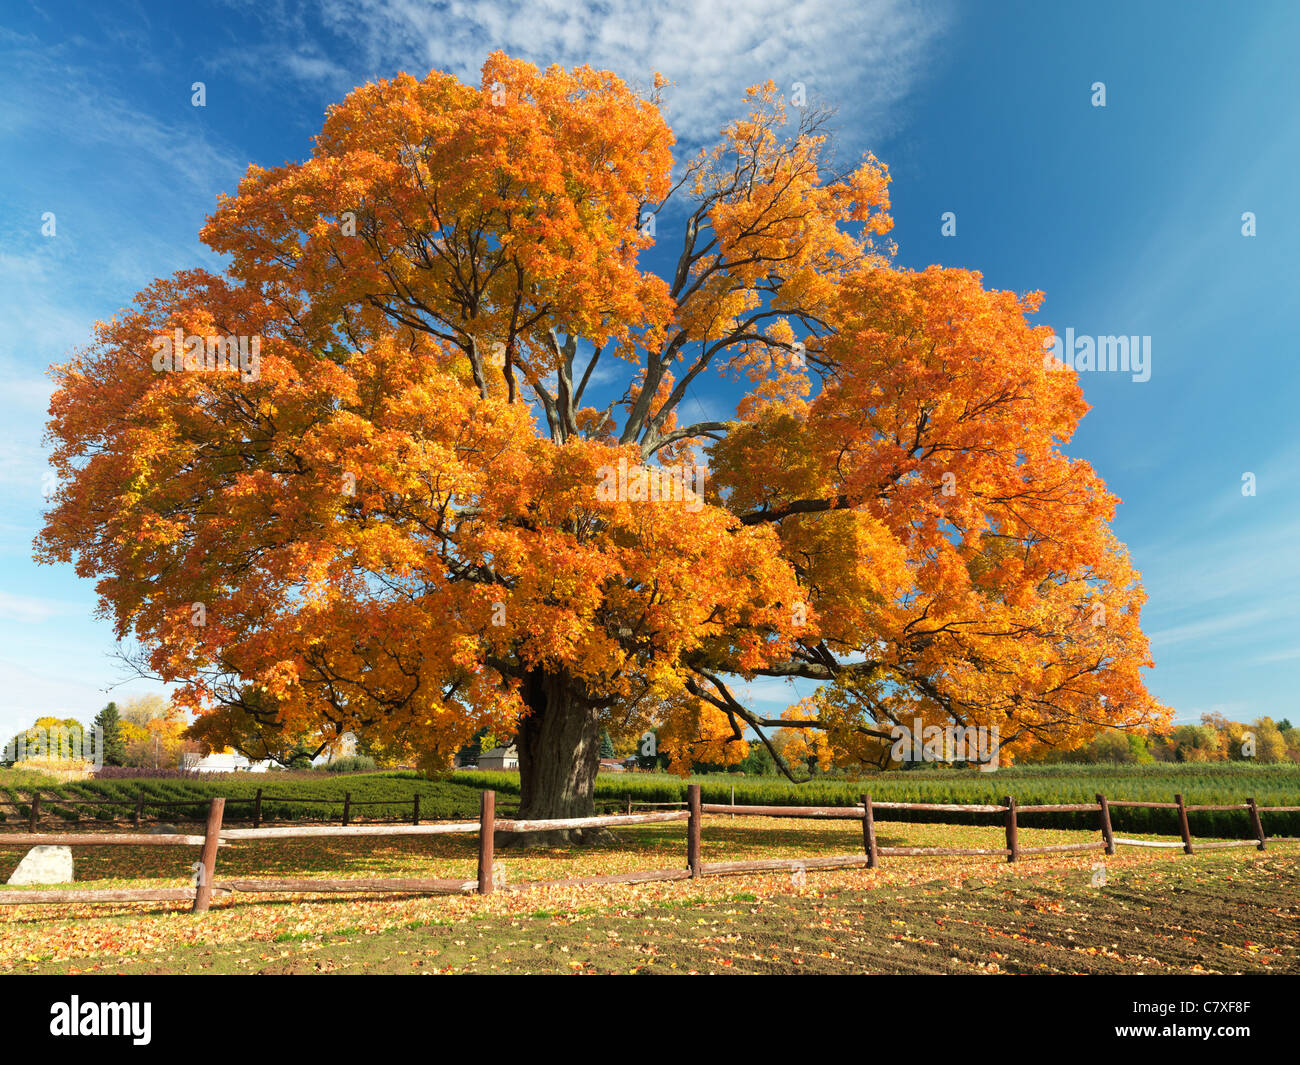 Canada, Ontario, Fonthill ,the Comfort Maple, a maple tree in full autumn colour,  it is one of the oldest trees in Canada aged over 450 years Stock Photo